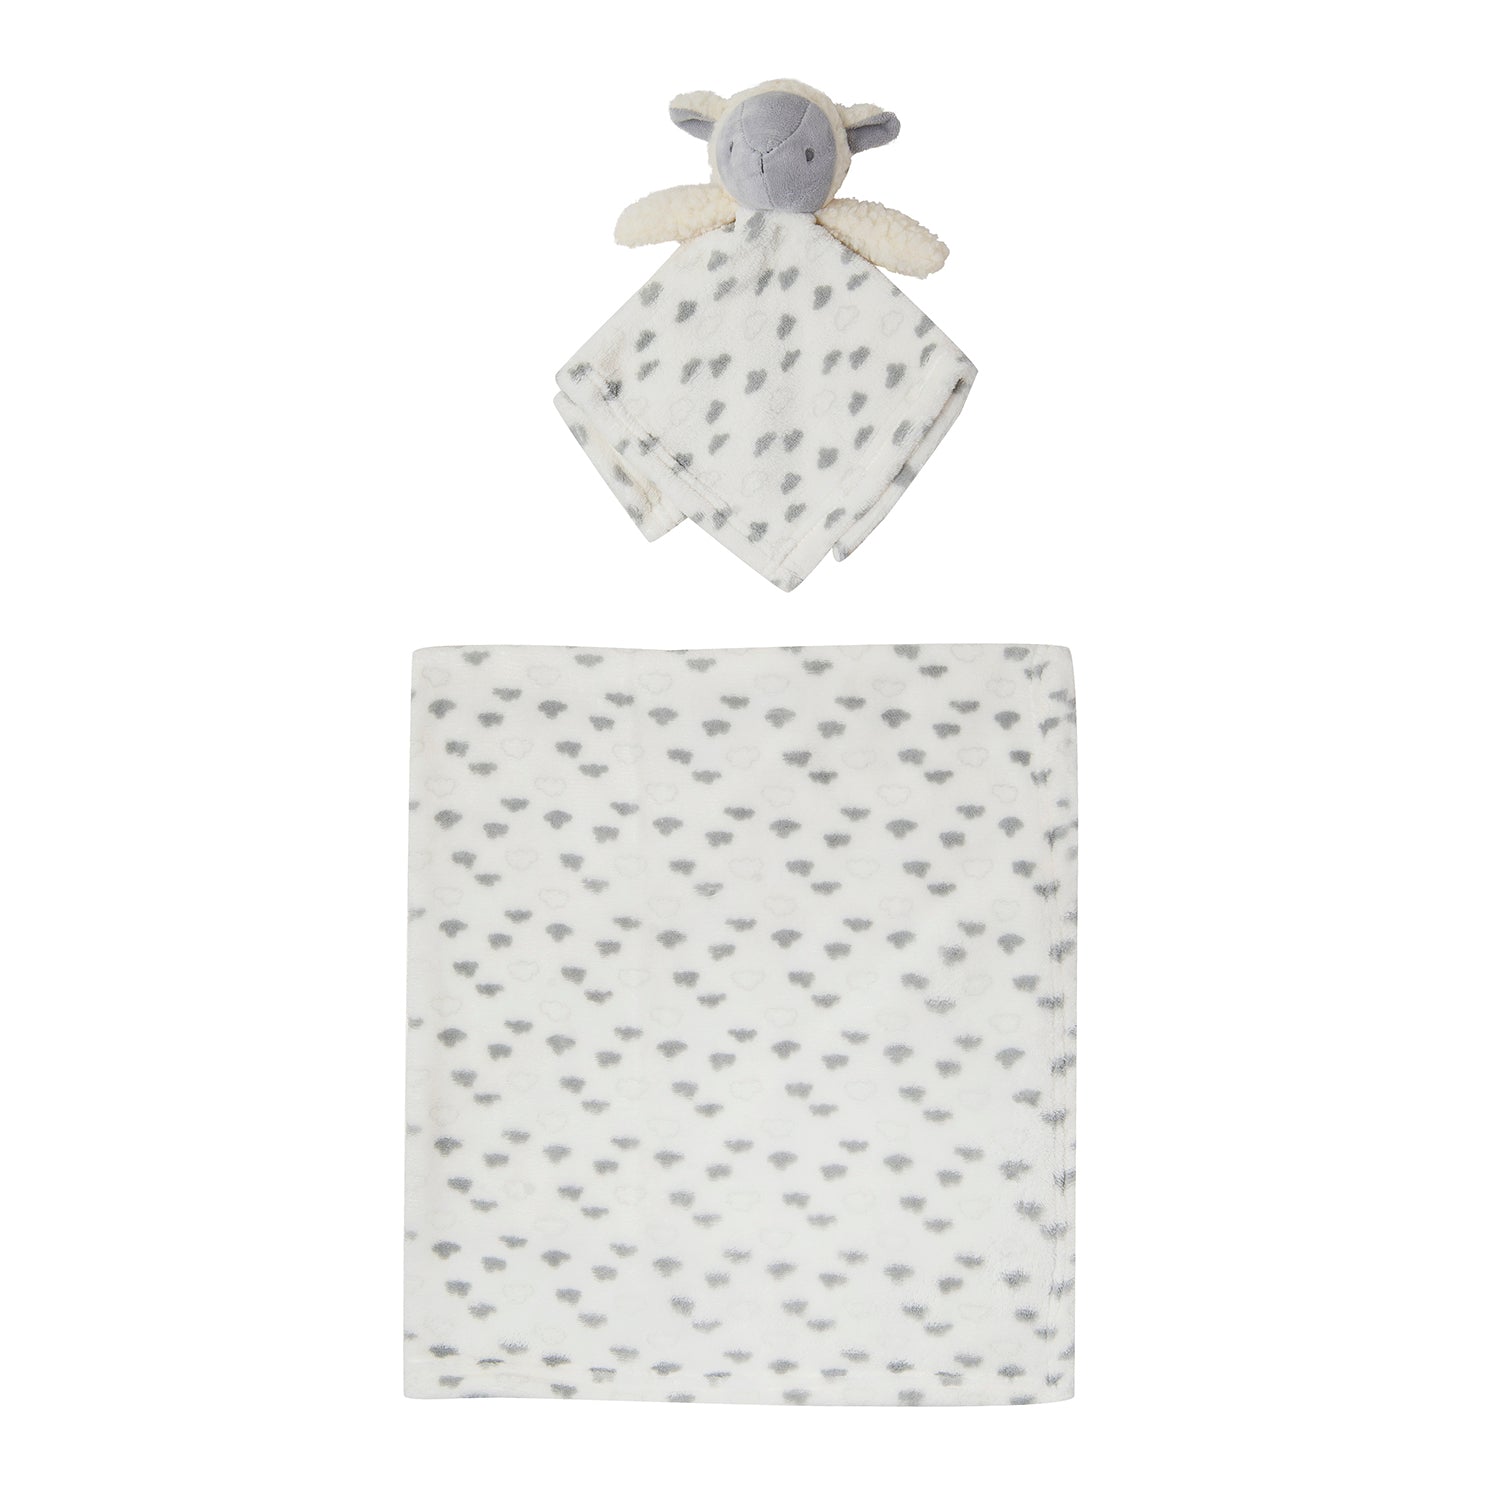 Baby Moo Sheep And Clouds Soft Cozy Plush Toy Blanket Cream